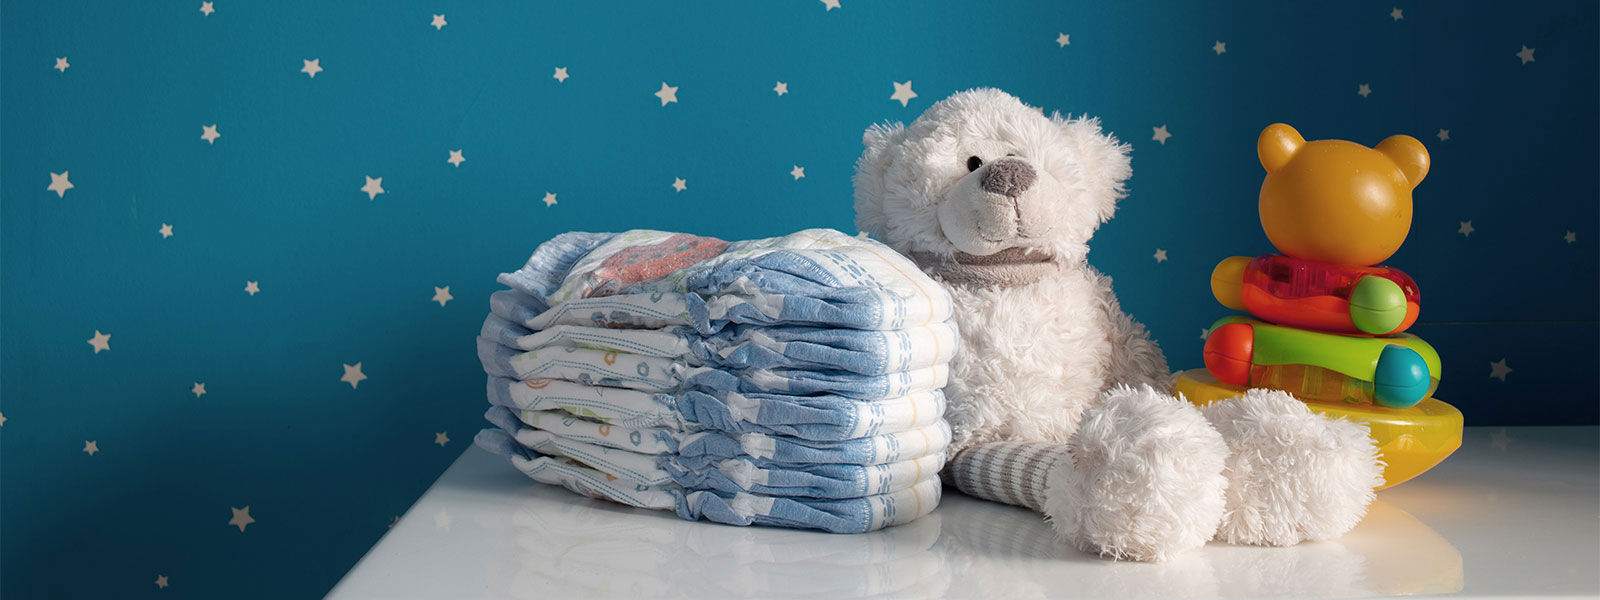 image of diapers and teddy bear on changing table